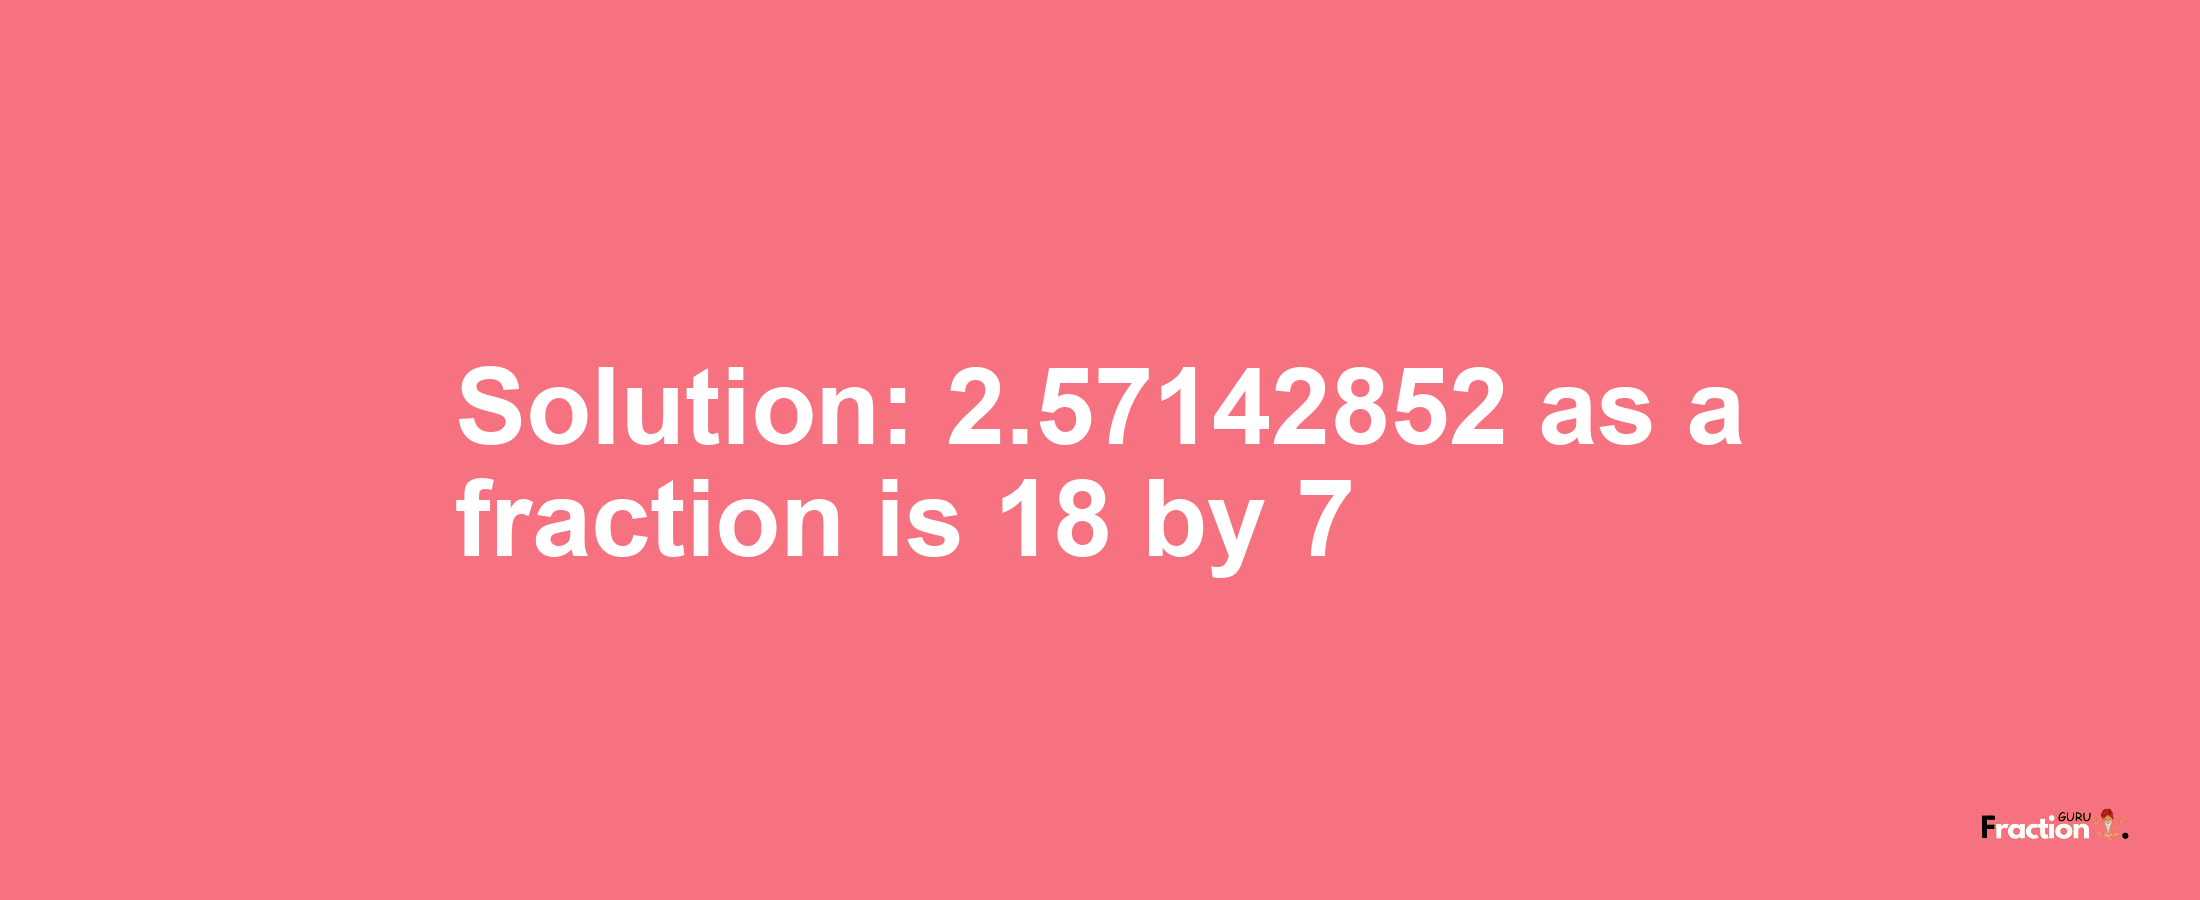 Solution:2.57142852 as a fraction is 18/7